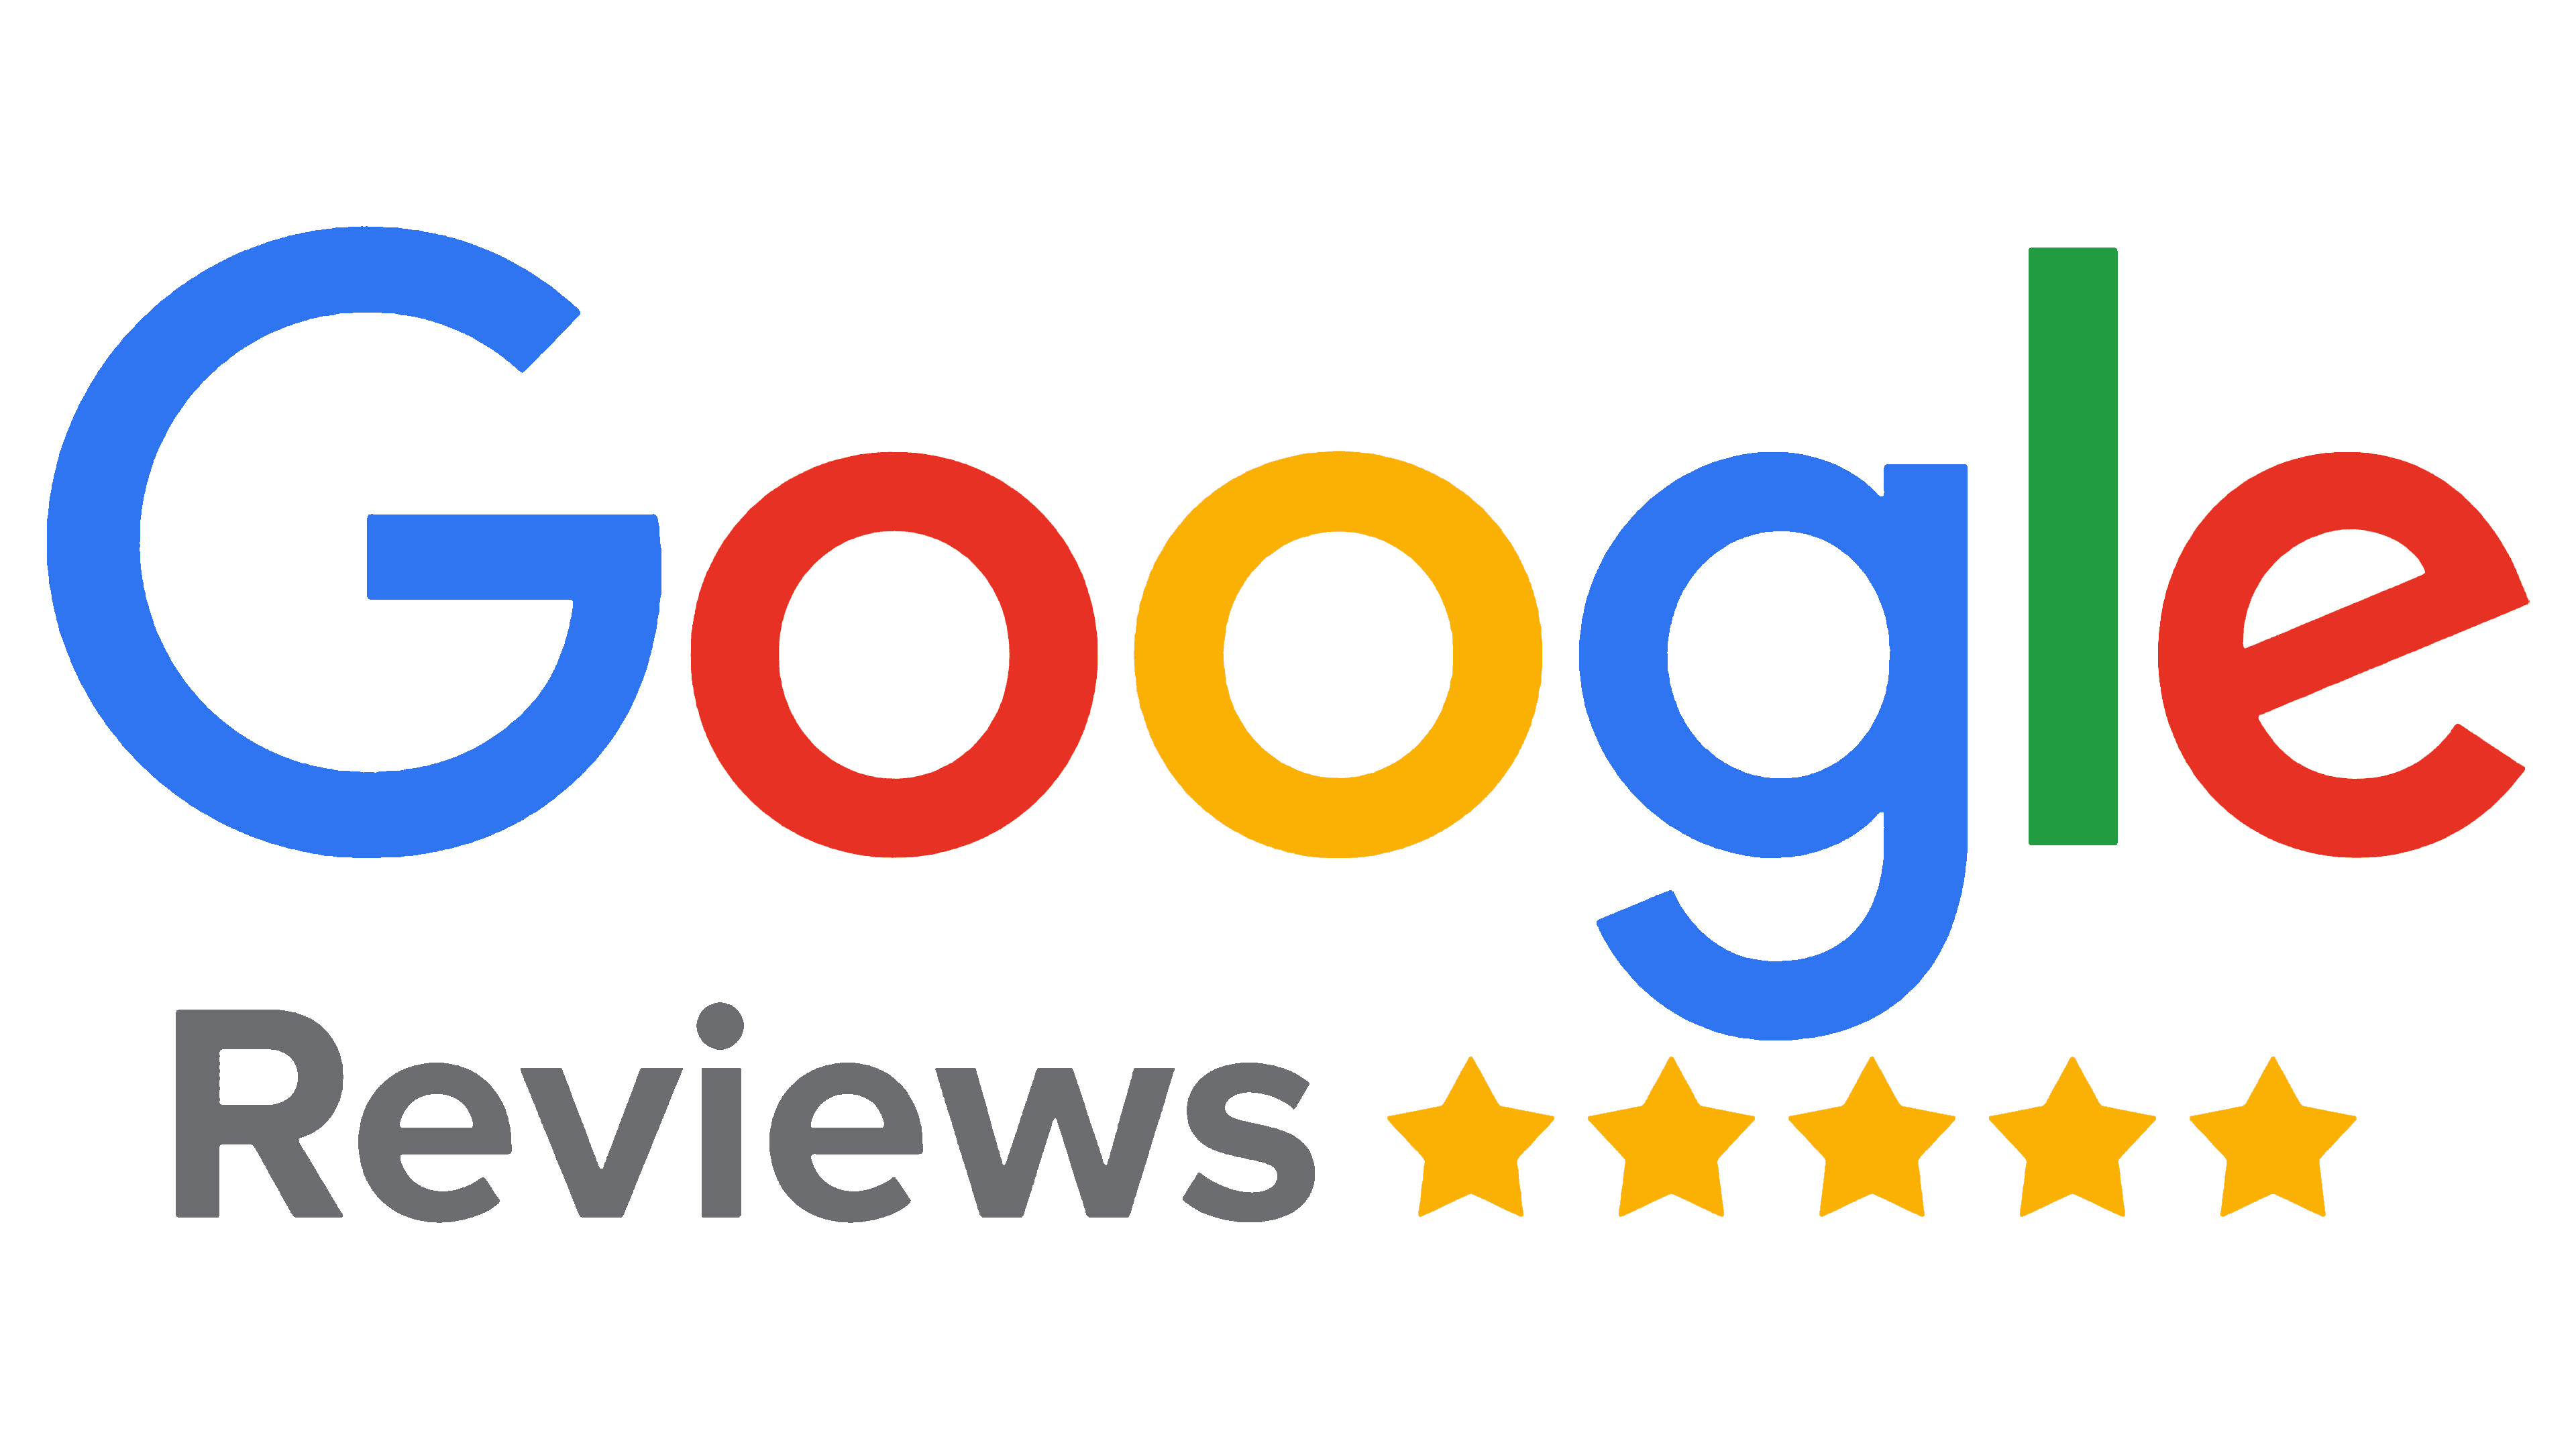 Where Can I See My Google Reviews?